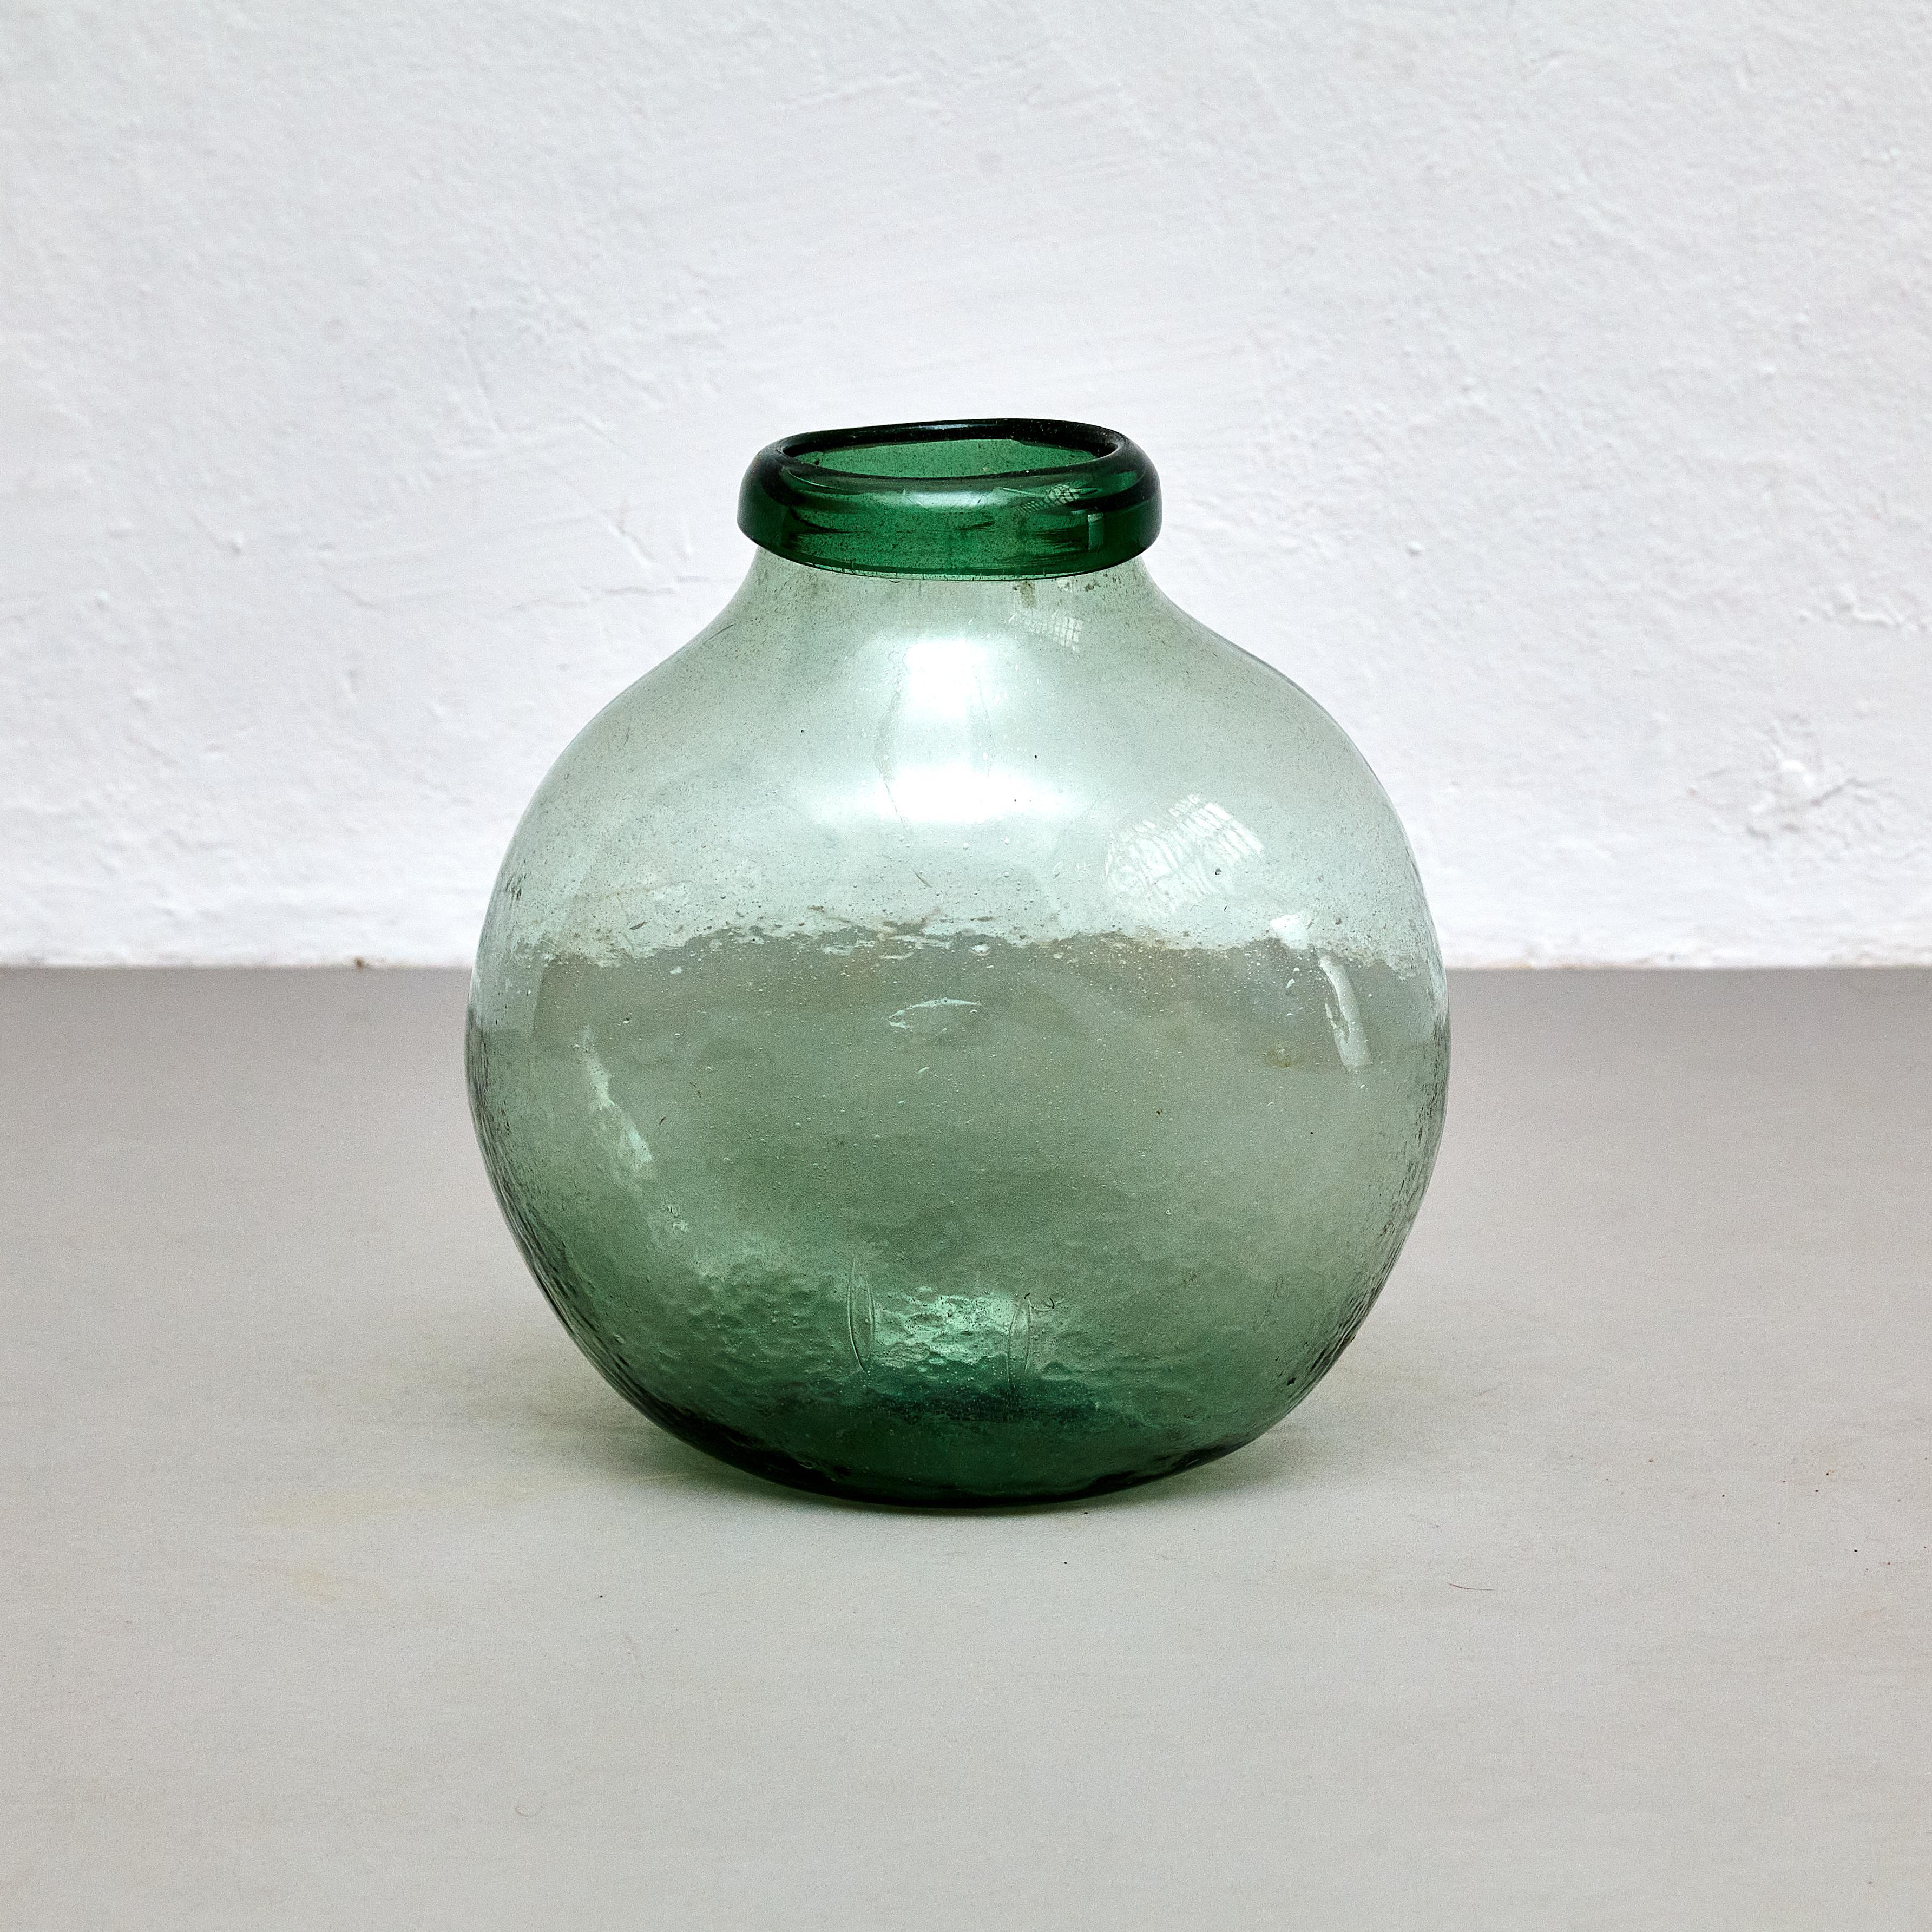 Early 20th centry Spanish glass bottle vase.

Manufactured in Spain, circa 1940.

In original condition with minor wear consistent of age and use, preserving a beautiful patina.

Materials: 
Glass 

Dimensions: 
D 26.5 cm x W 35cm x H 36